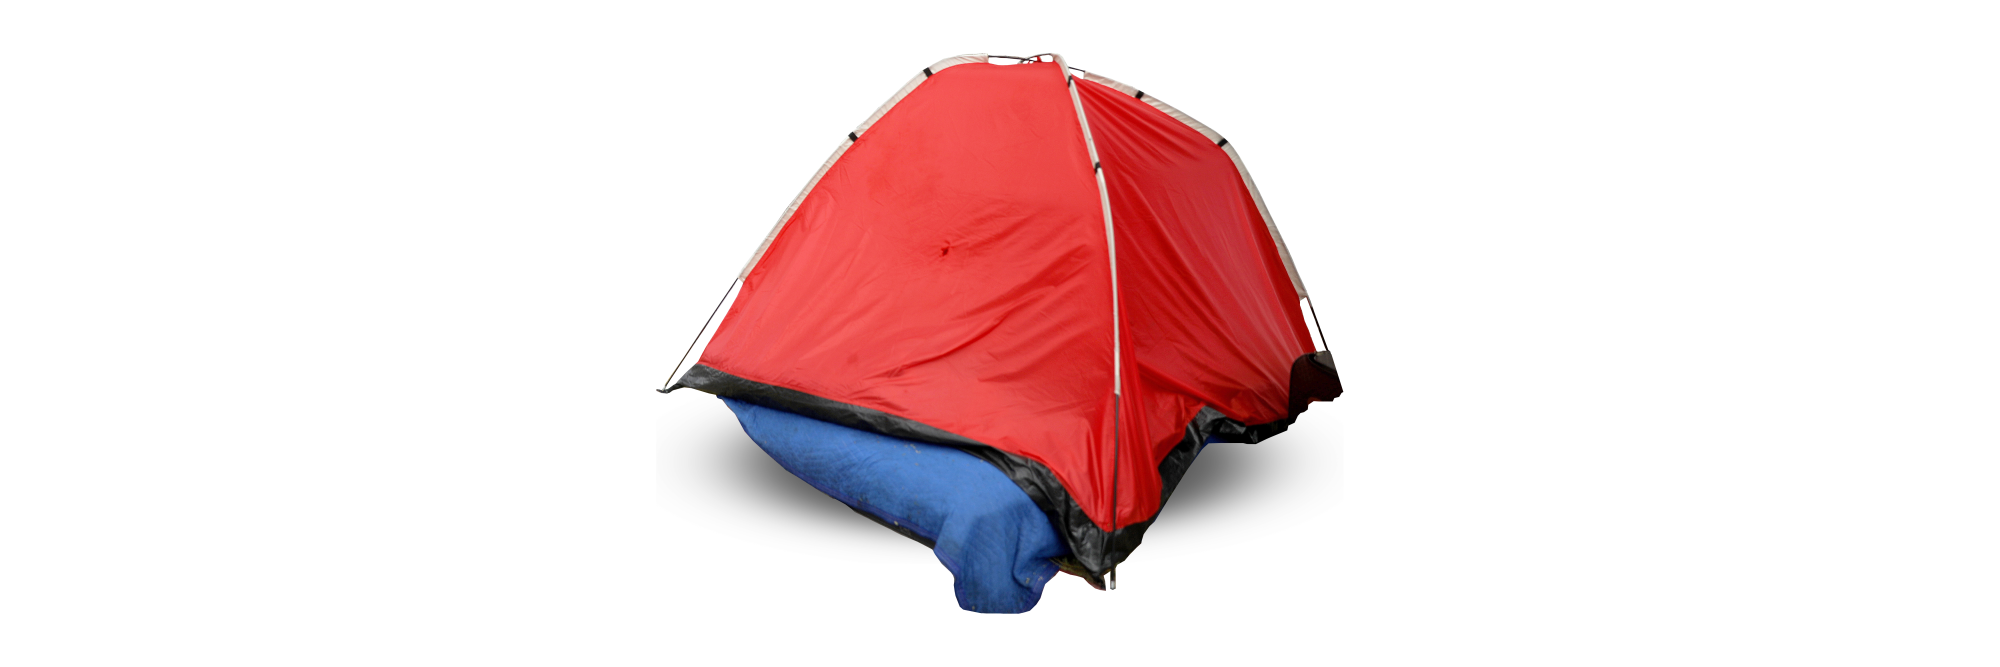 A red tent on top of a blue mattress